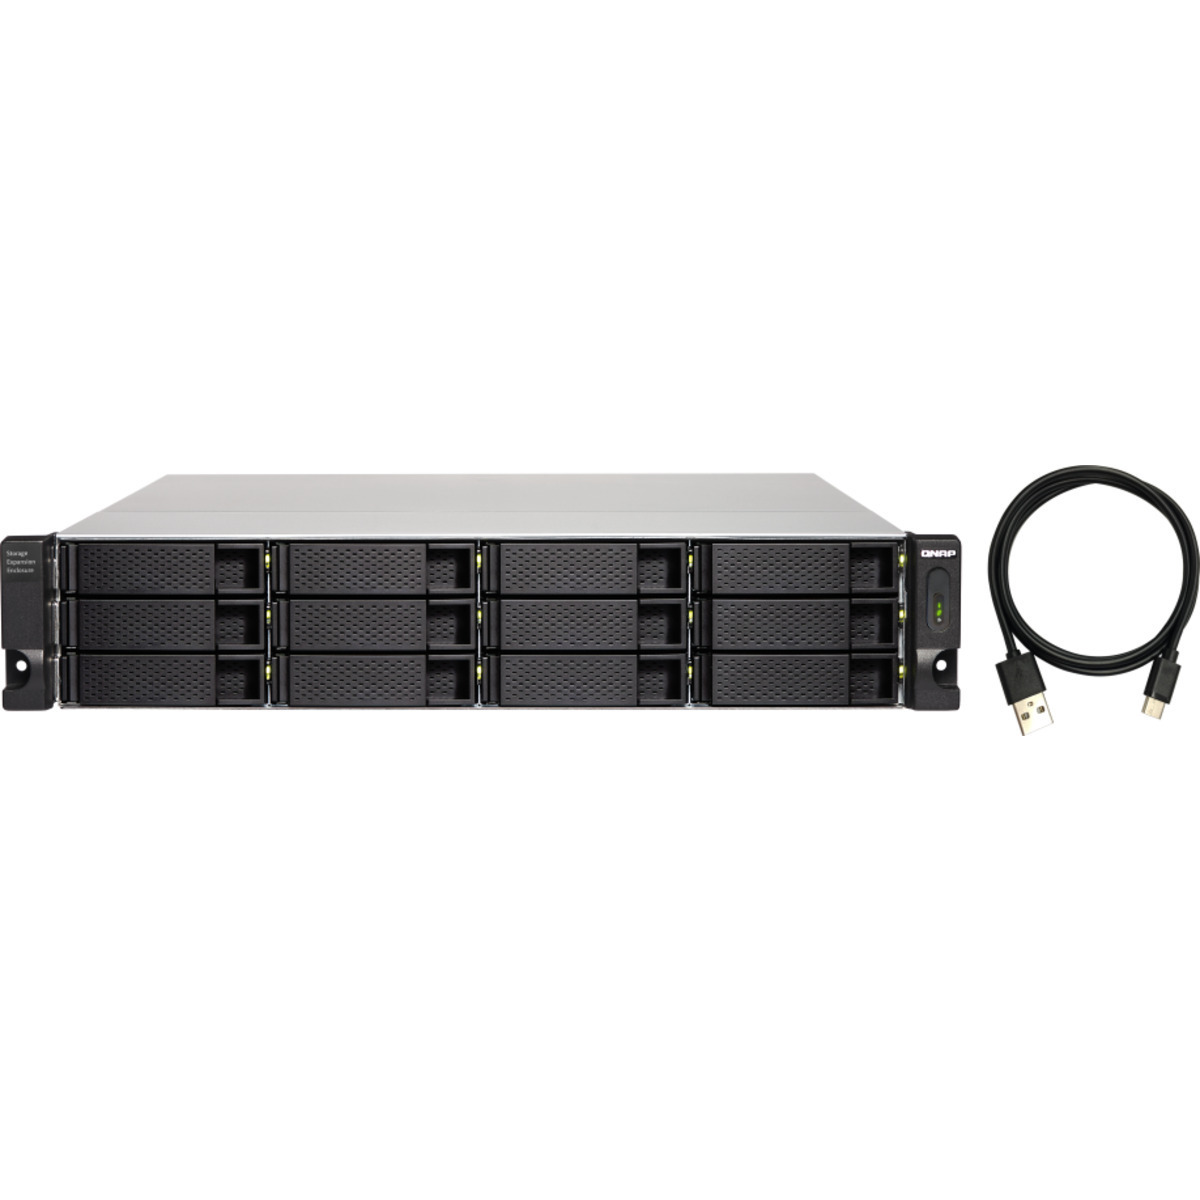 QNAP TL-R1200C-RP External Expansion Drive 48tb 12-Bay RackMount Multimedia / Power User / Business Expansion Enclosure 8x6tb Western Digital Red Plus WD60EFPX 3.5 5640rpm SATA 6Gb/s HDD NAS Class Drives Installed - Burn-In Tested TL-R1200C-RP External Expansion Drive